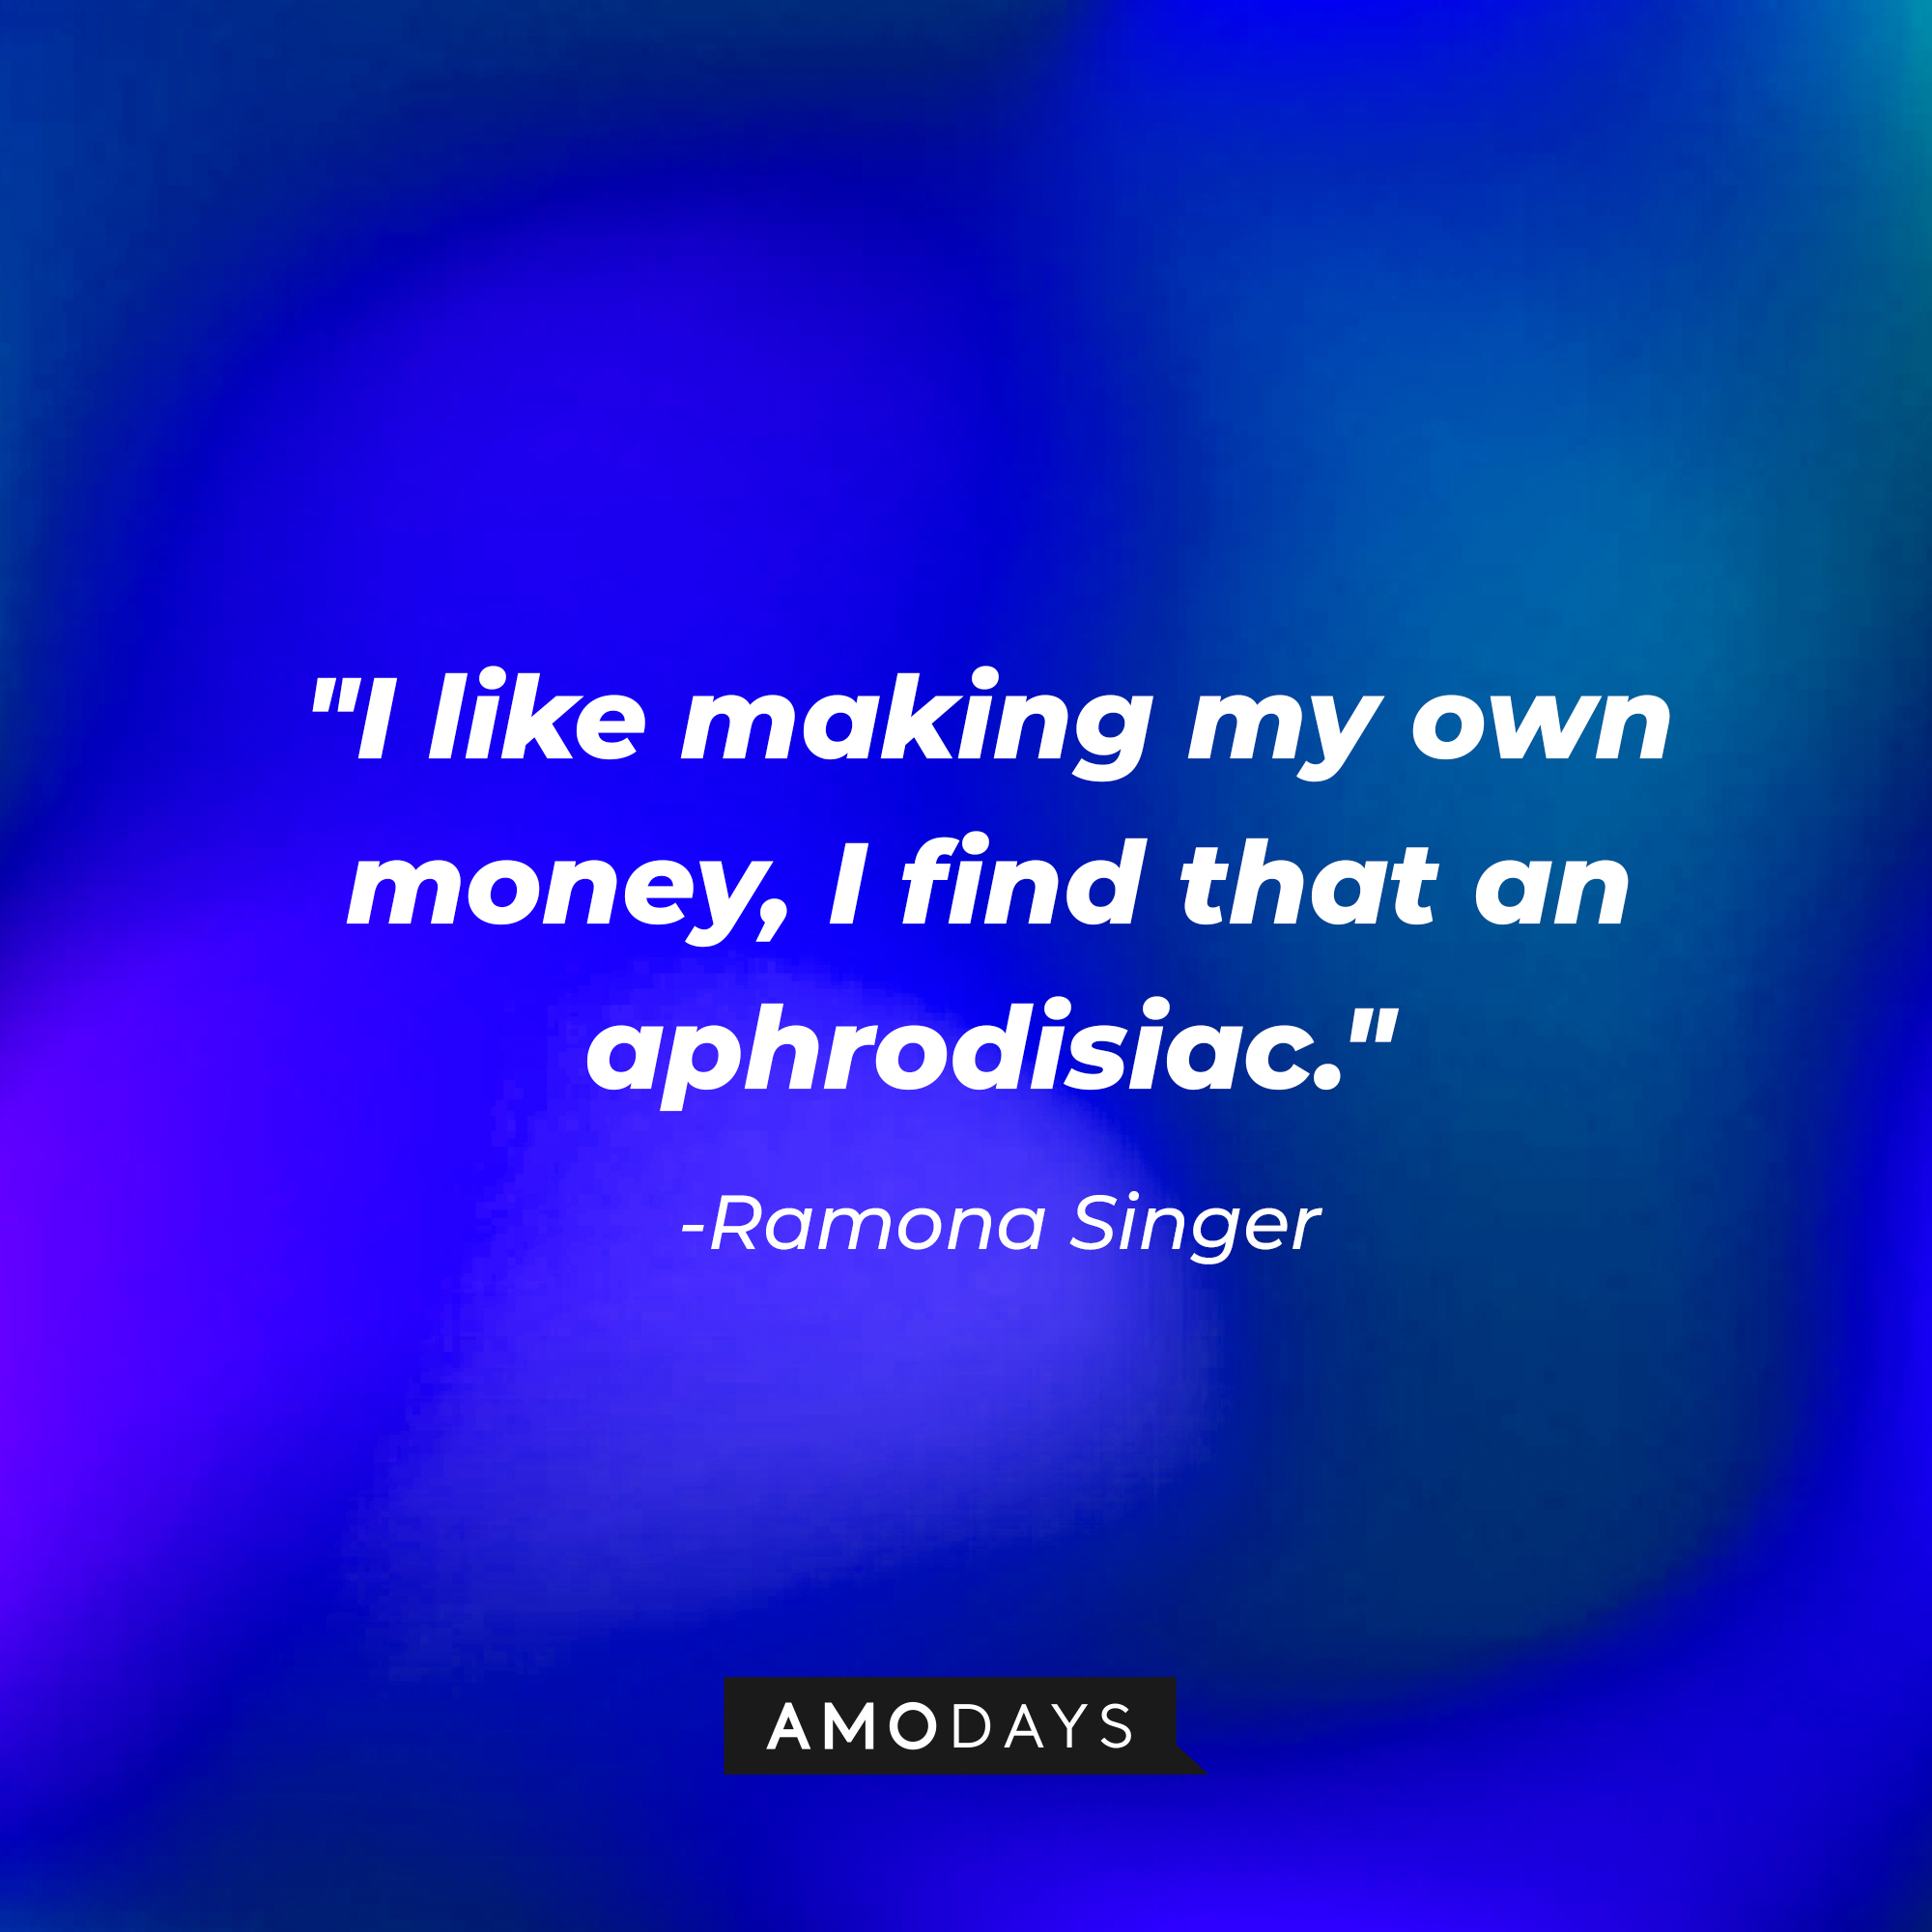 Ramona Singer’s quote: "I like making my own money, I find that an aphrodisiac."  | Source: AmoDays